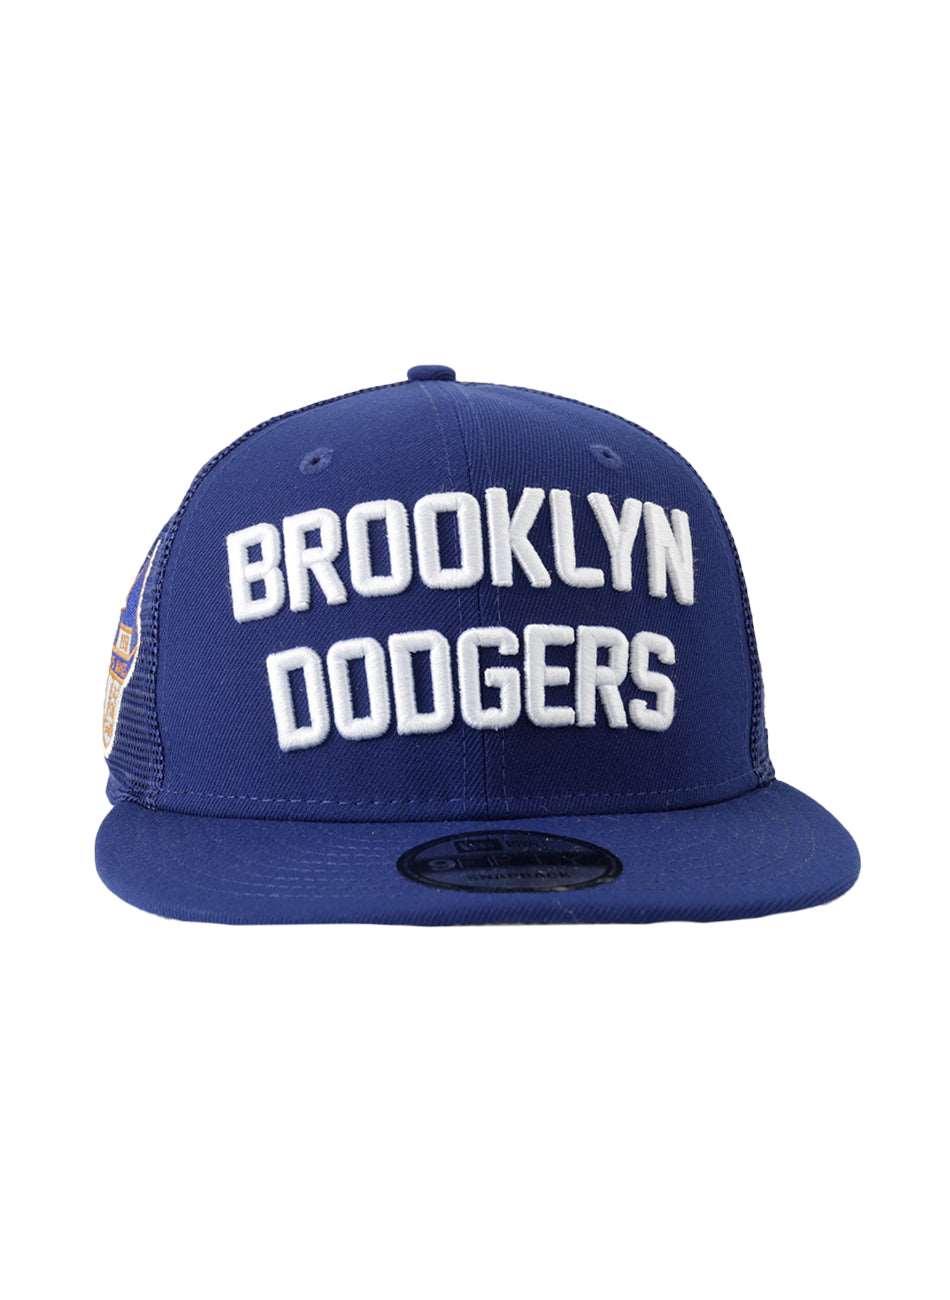 Brooklyn Dodgers Stacked 9Fifty Snap-Back Hat